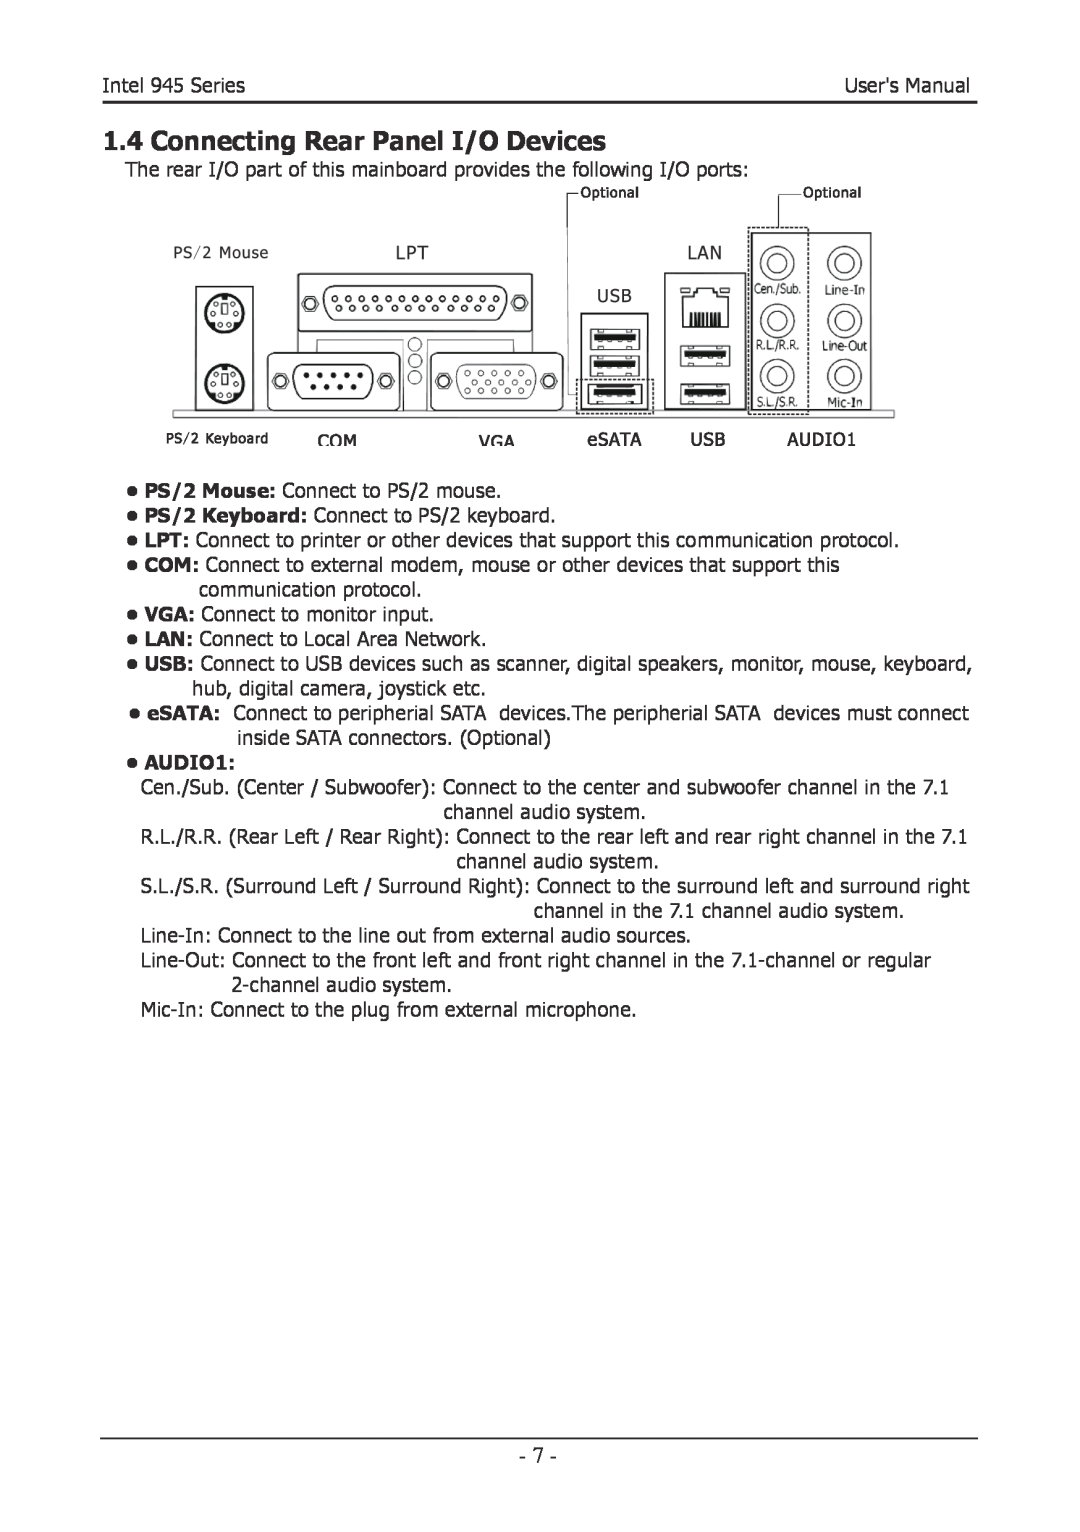 Intel 945GZT, 945GCT user manual Connecting Rear Panel I/O Devices, AUDIO1 